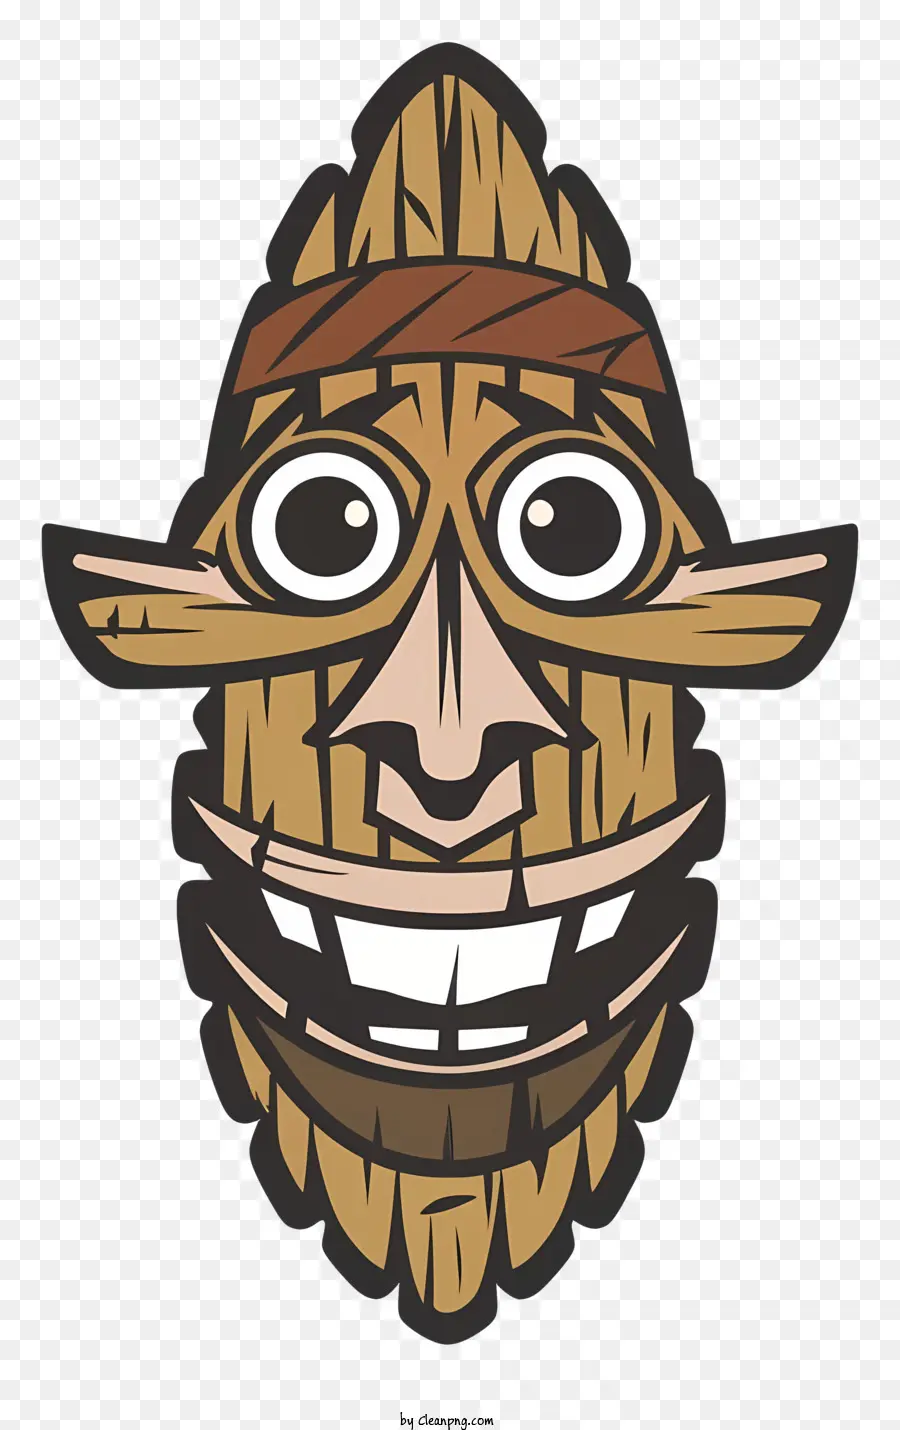 cartoon character smiling wooden mask wide smile headband made of leaves closed eyes